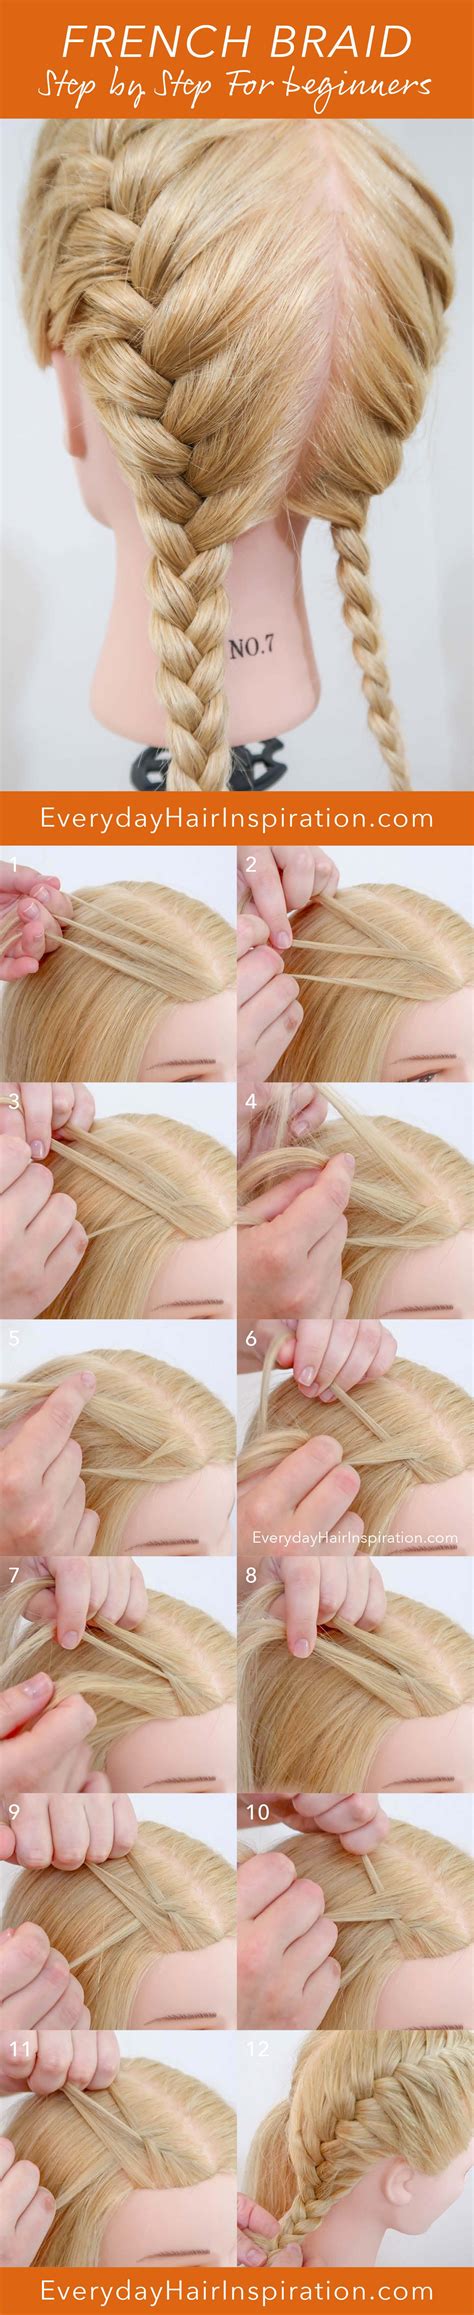  79 Stylish And Chic How To Double French Braid My Hair For Hair Ideas